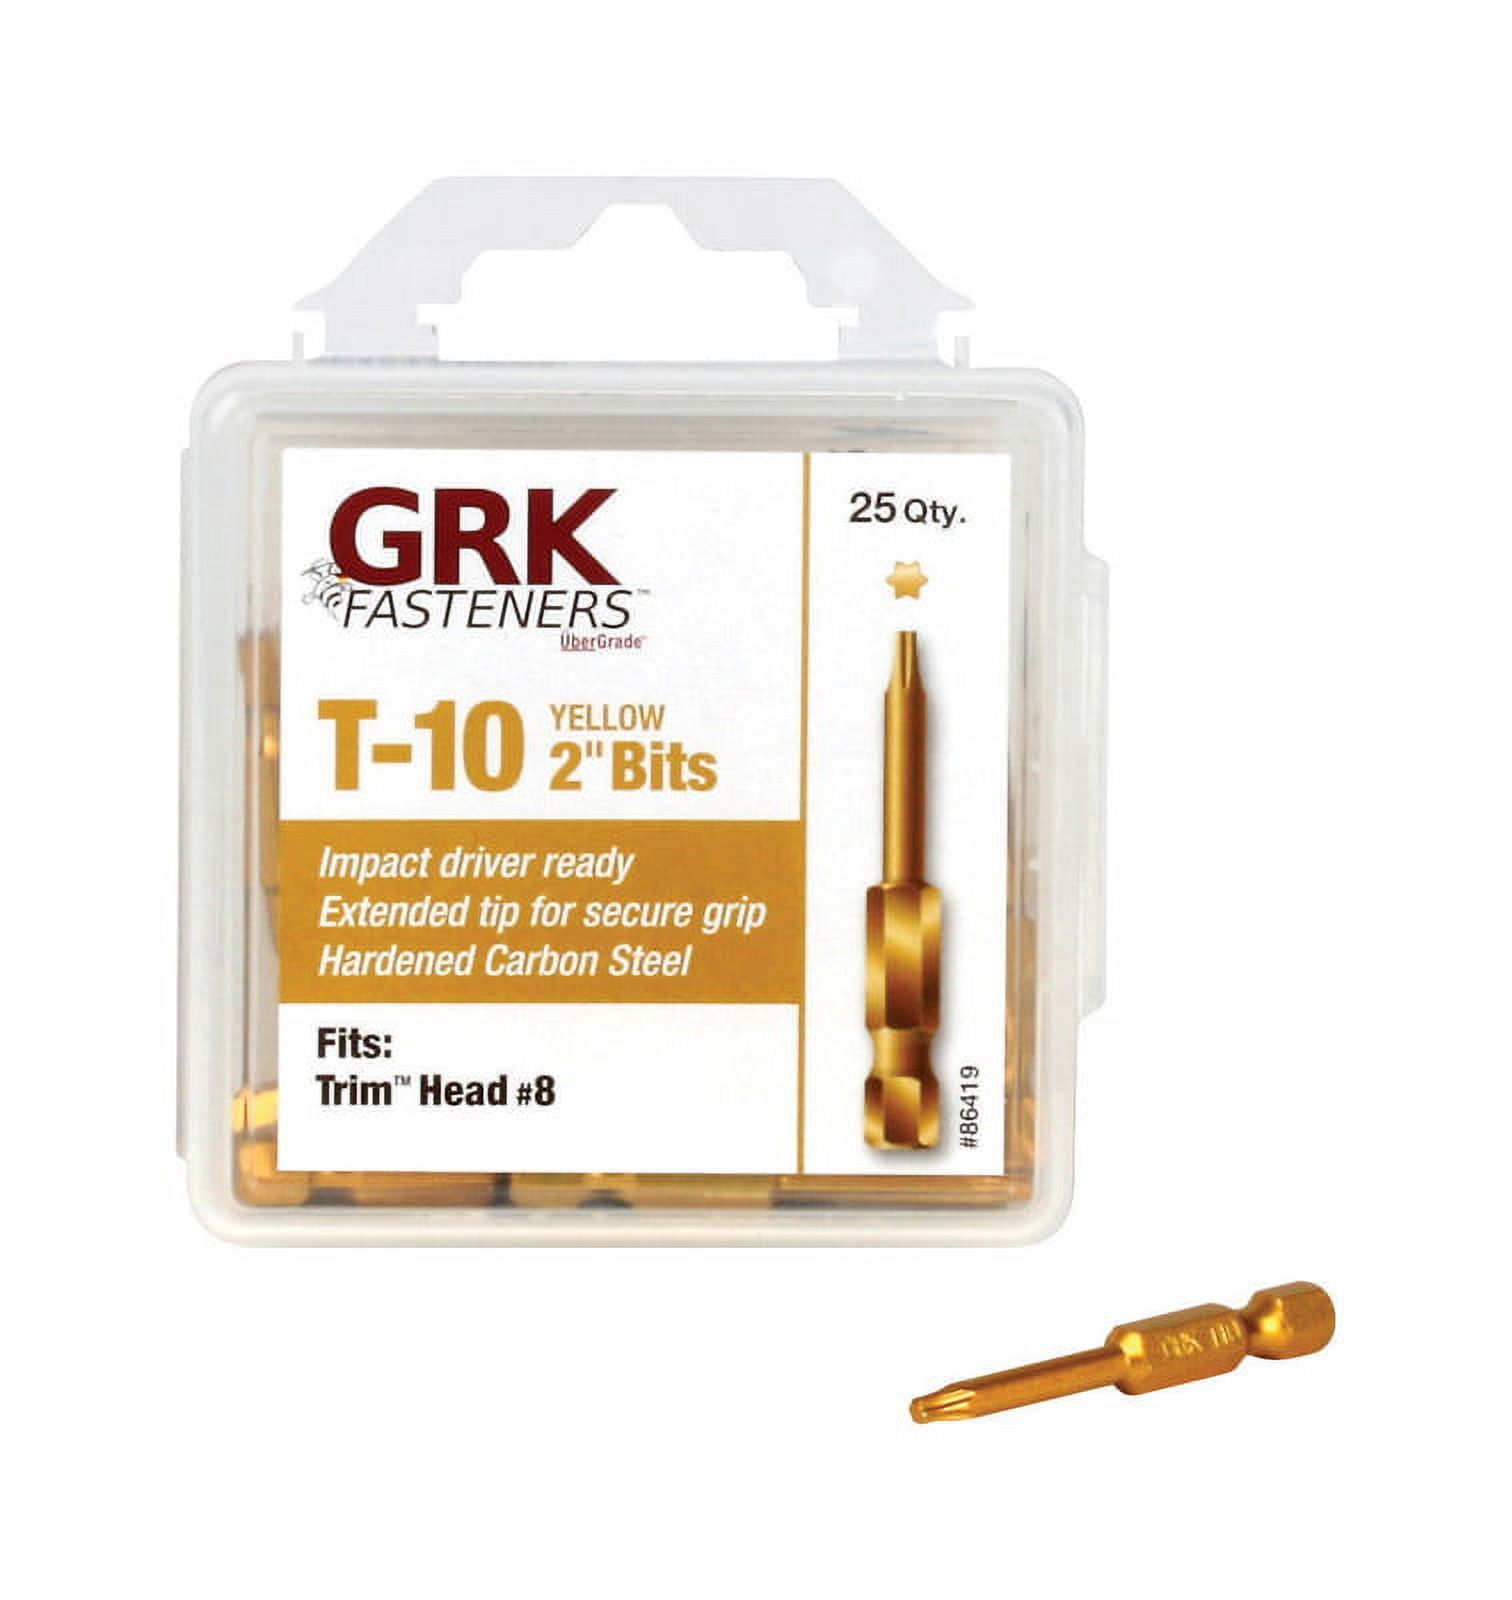 Picture of GRK Fasteners 2824704 T-10 x 2 in. Star Carbon Steel 0.25 in. Hex Shank Impact Power Bit - 25 Piece